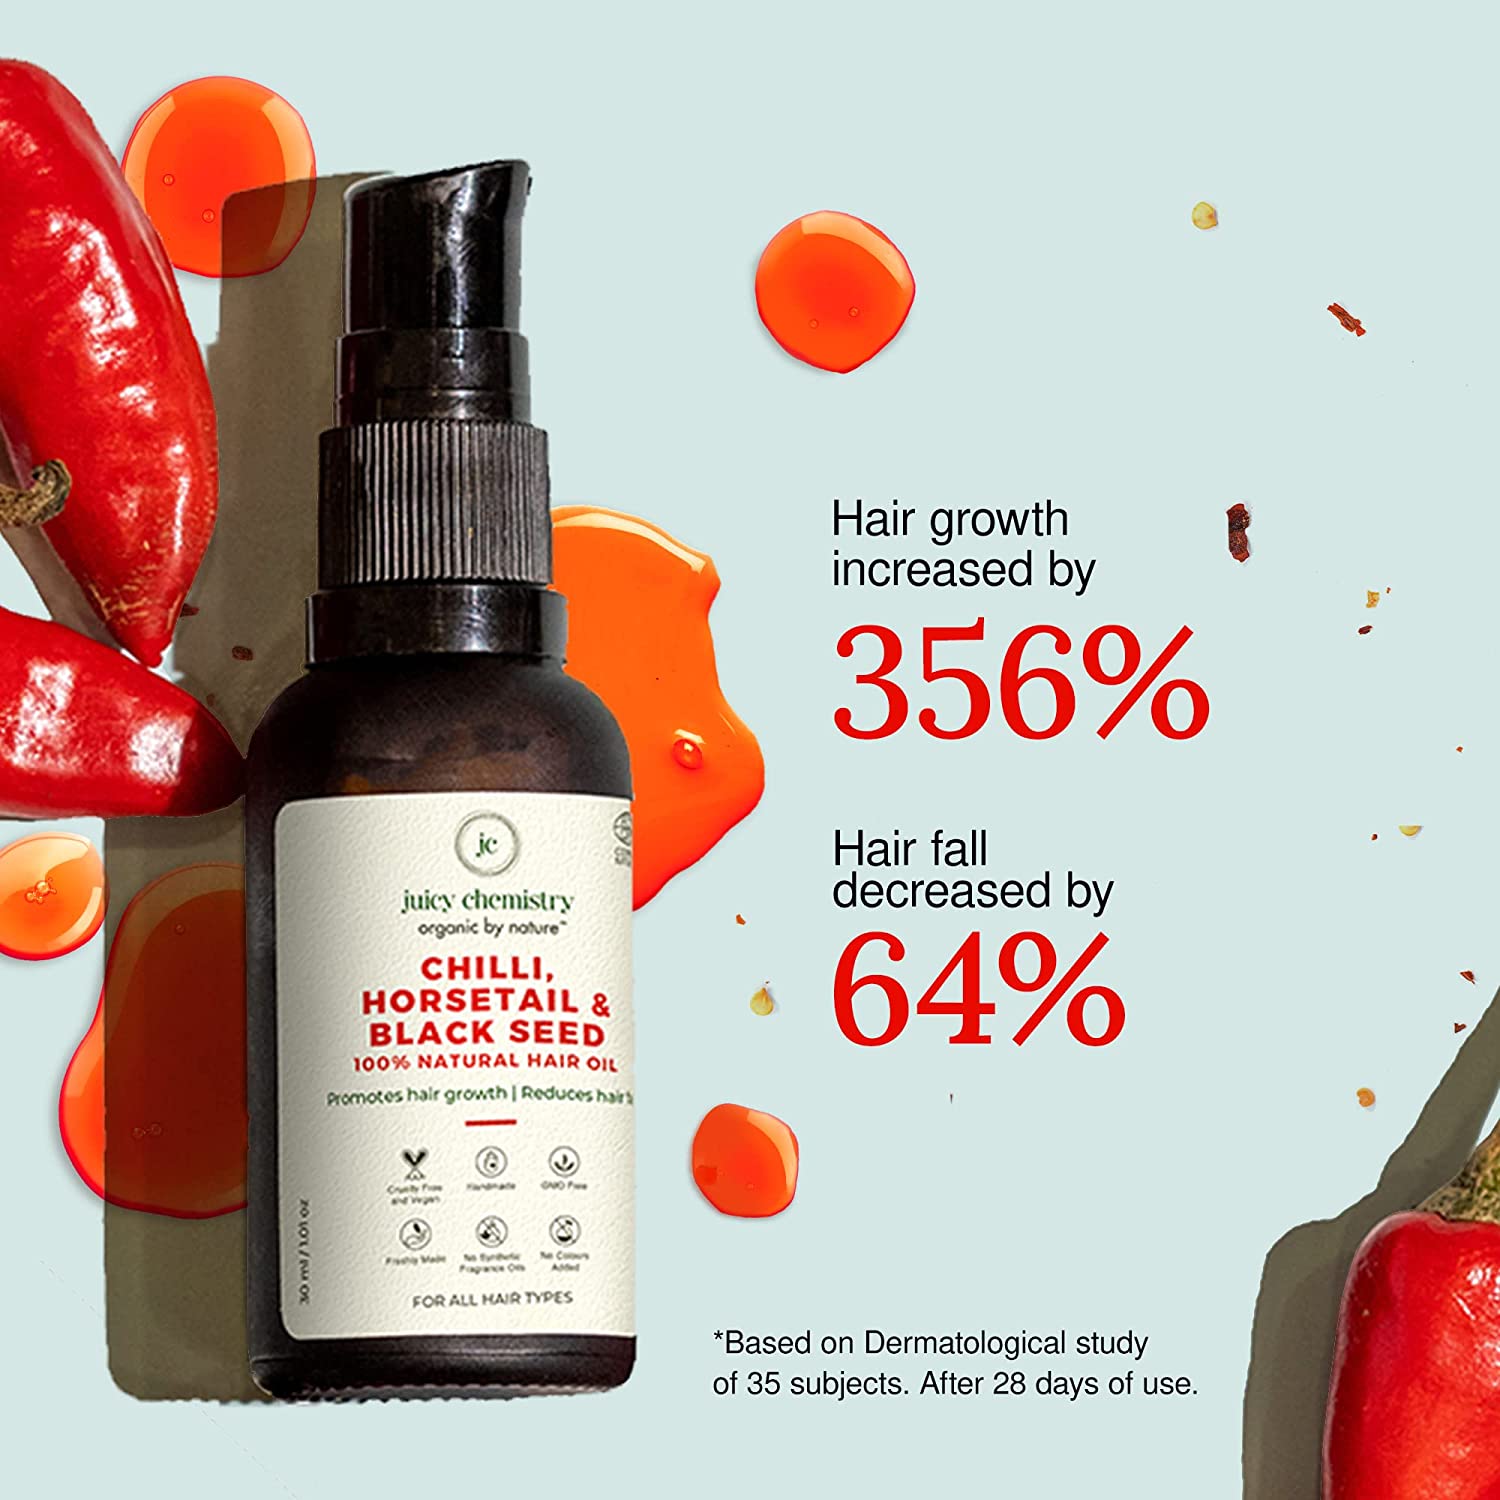 Juicy Chemistry Chilli, Horsetail and Black Seed Hair Oil for Hair Growth and Hair Fall Control - 30